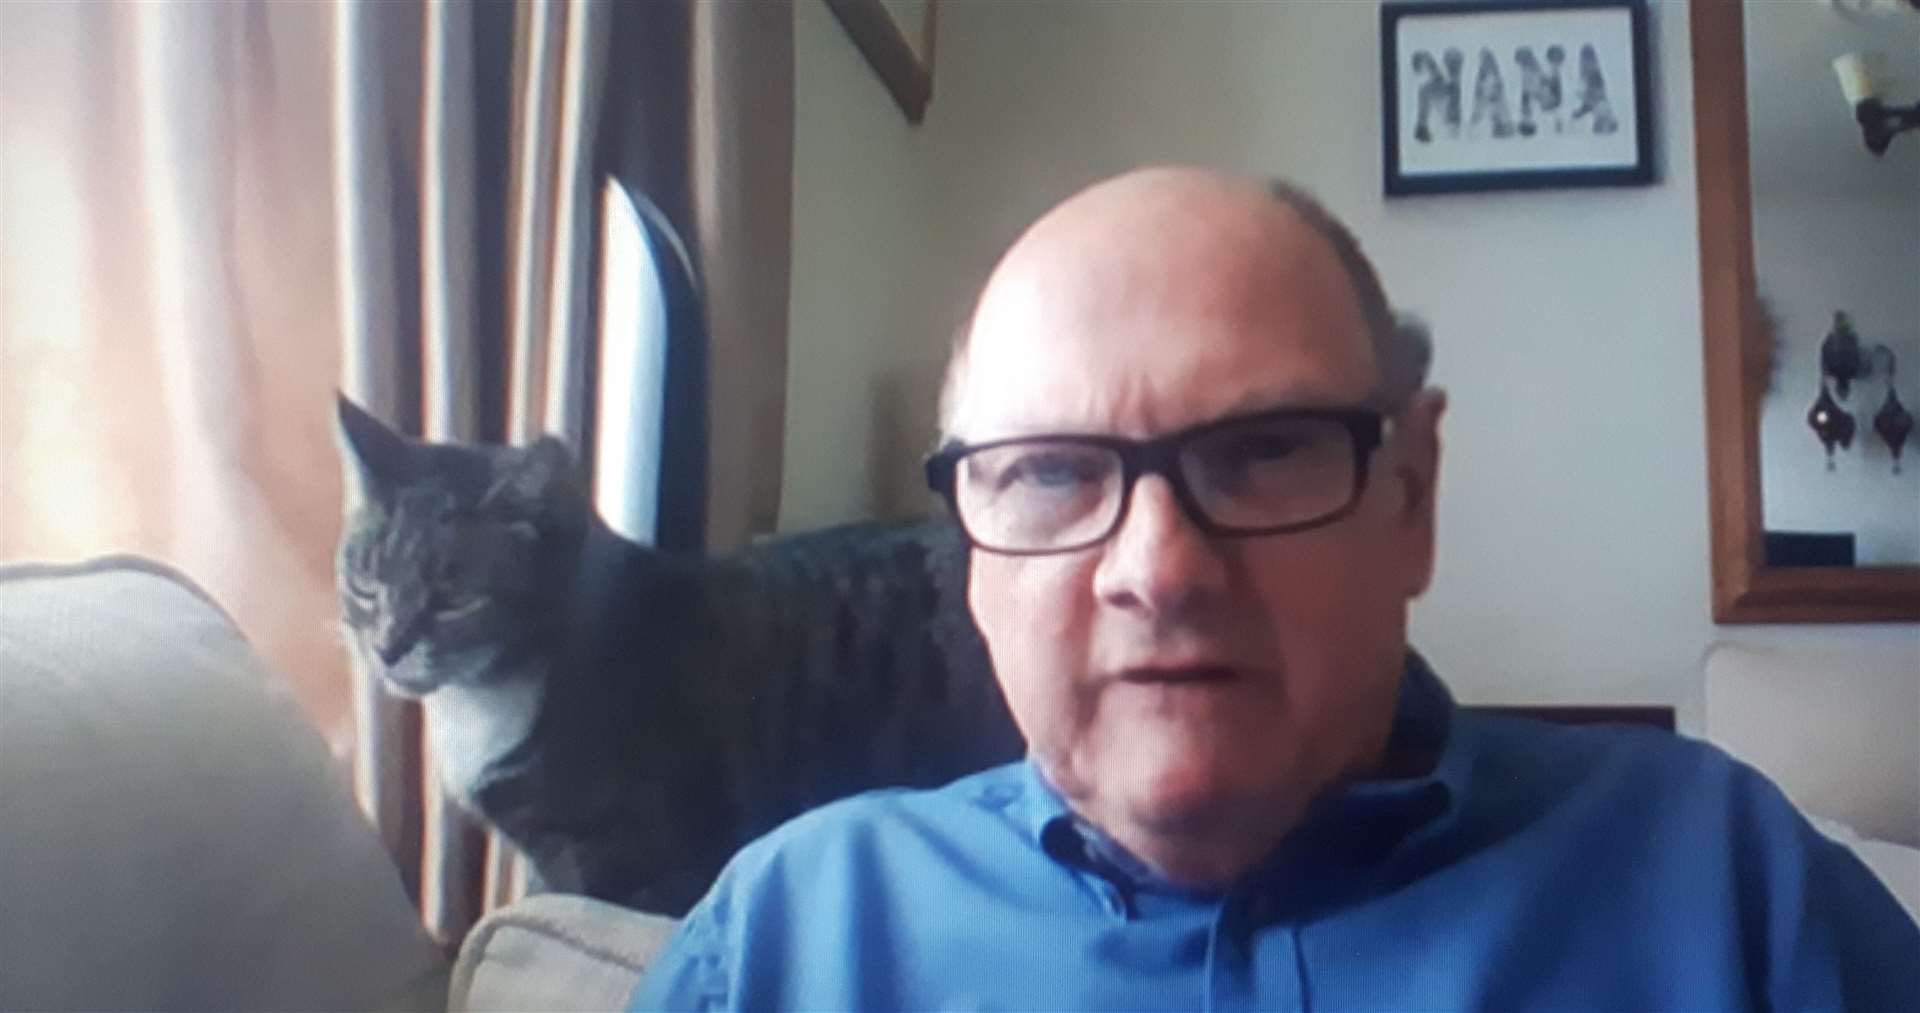 Belle the cat makes her appearance just as her owner, senior reporter John Nurden, outlines his editorial newslist, via video conference